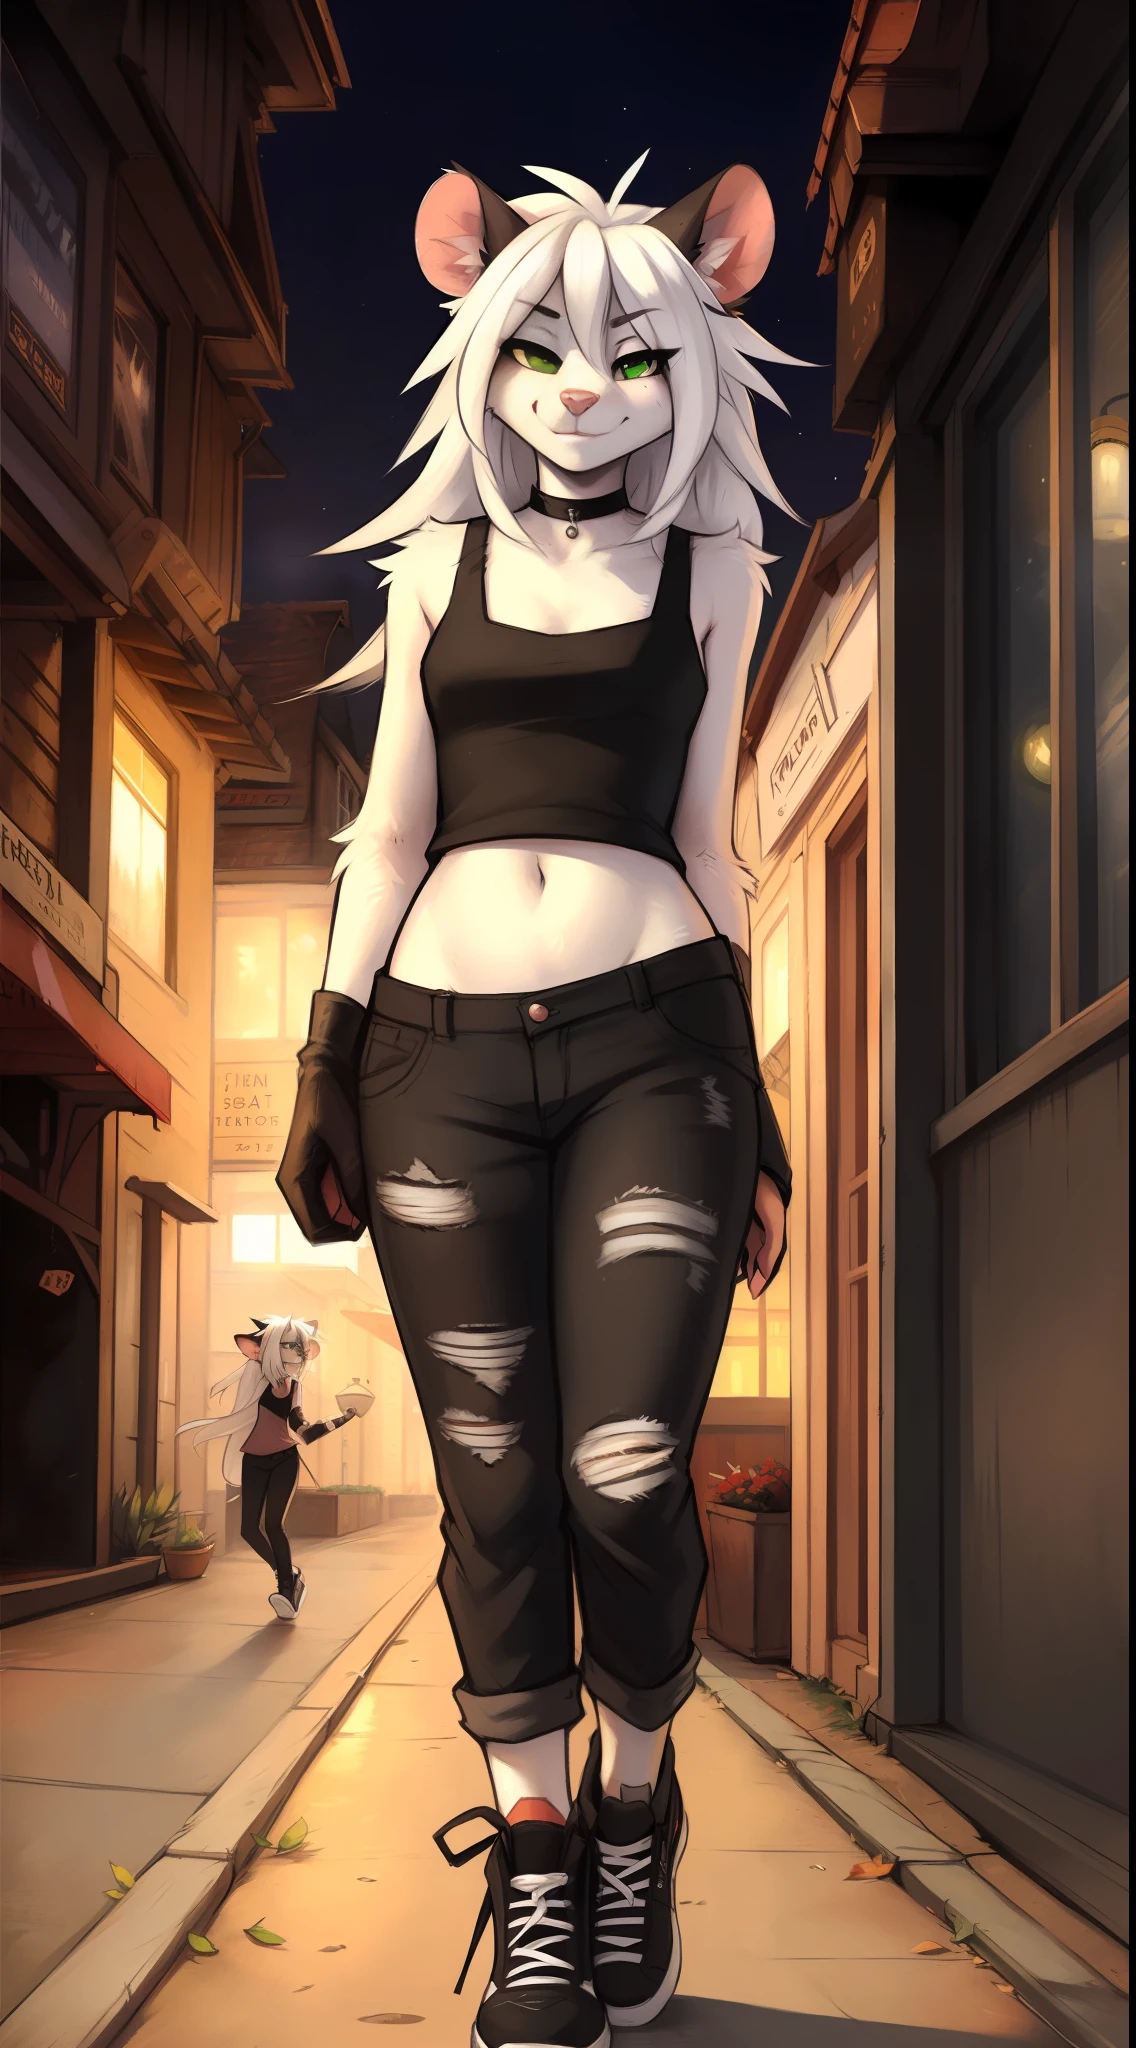 (best quality: 0.8), (best quality: 0.8), perfect anime illustration, portrait of a pretty woman walking around town, possum girl, torn black tank top, black long pants, black sneakers, green eyes, white body, black and white hair, long hair, detailed fur, detailed body, detailed lighting, beautiful, by fluff-kevlar, by Zackary911, by Kenket, by Kilinah, by fluff-kevlar, Fishnet gloves, black choker, full body